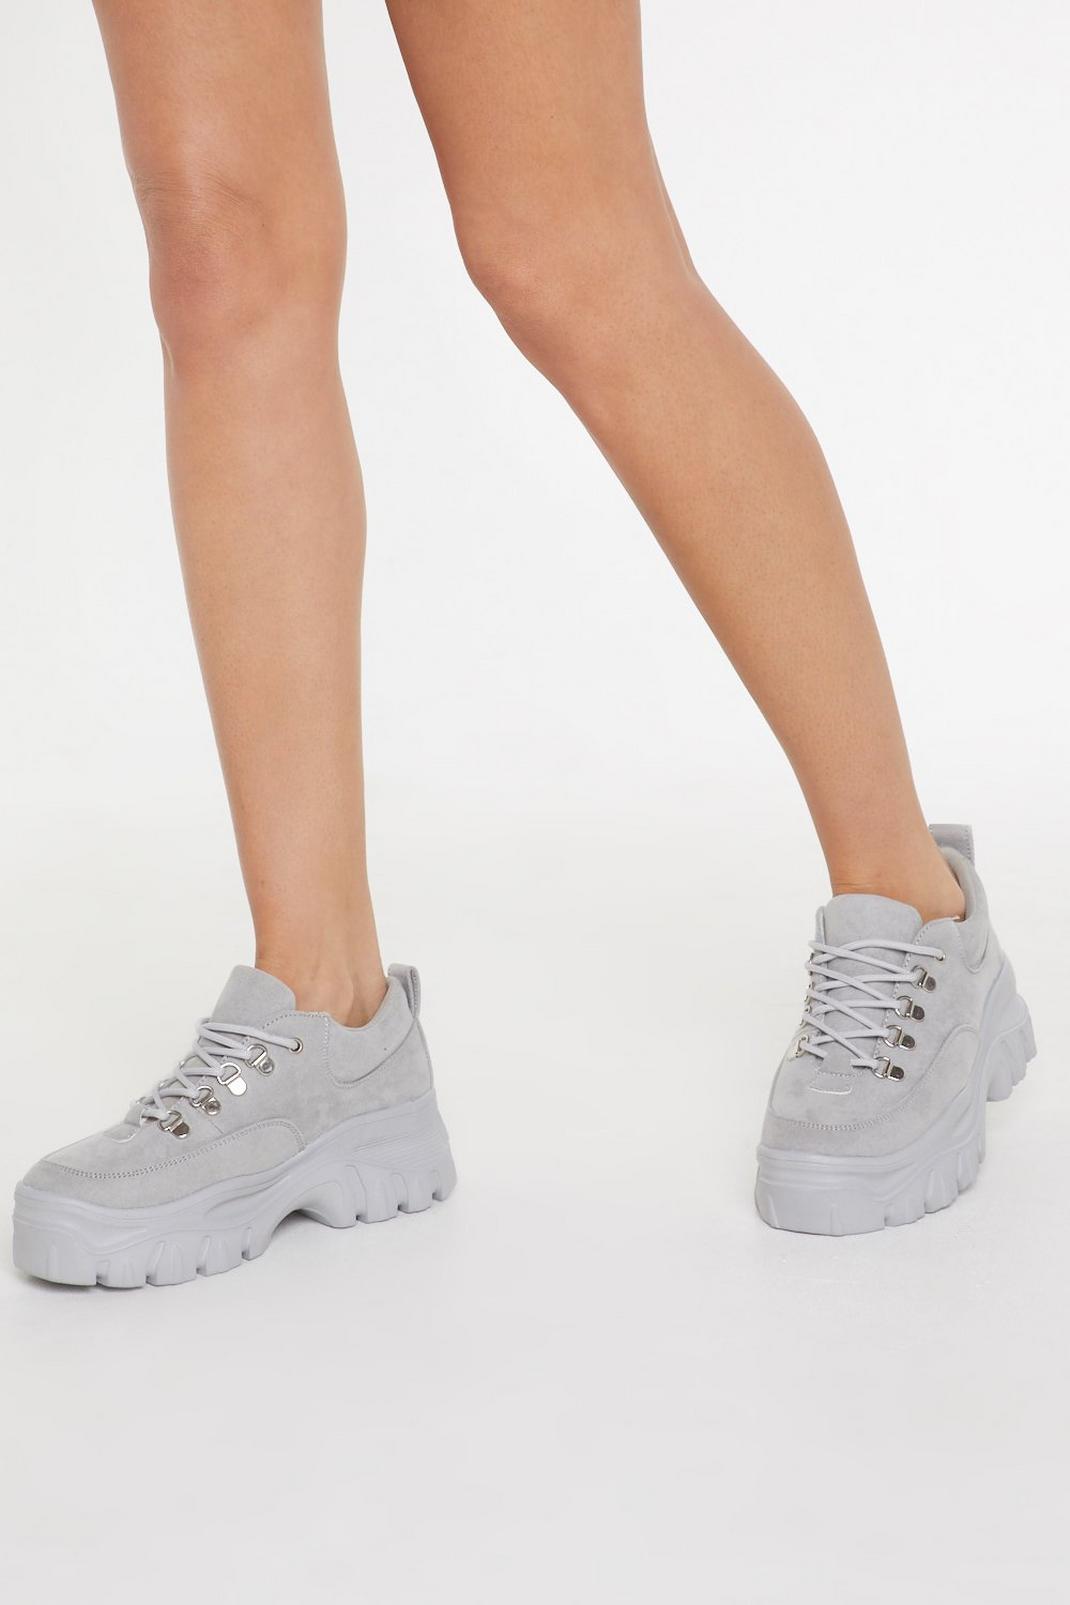 Immi Suede Grey Chunky Trainer image number 1